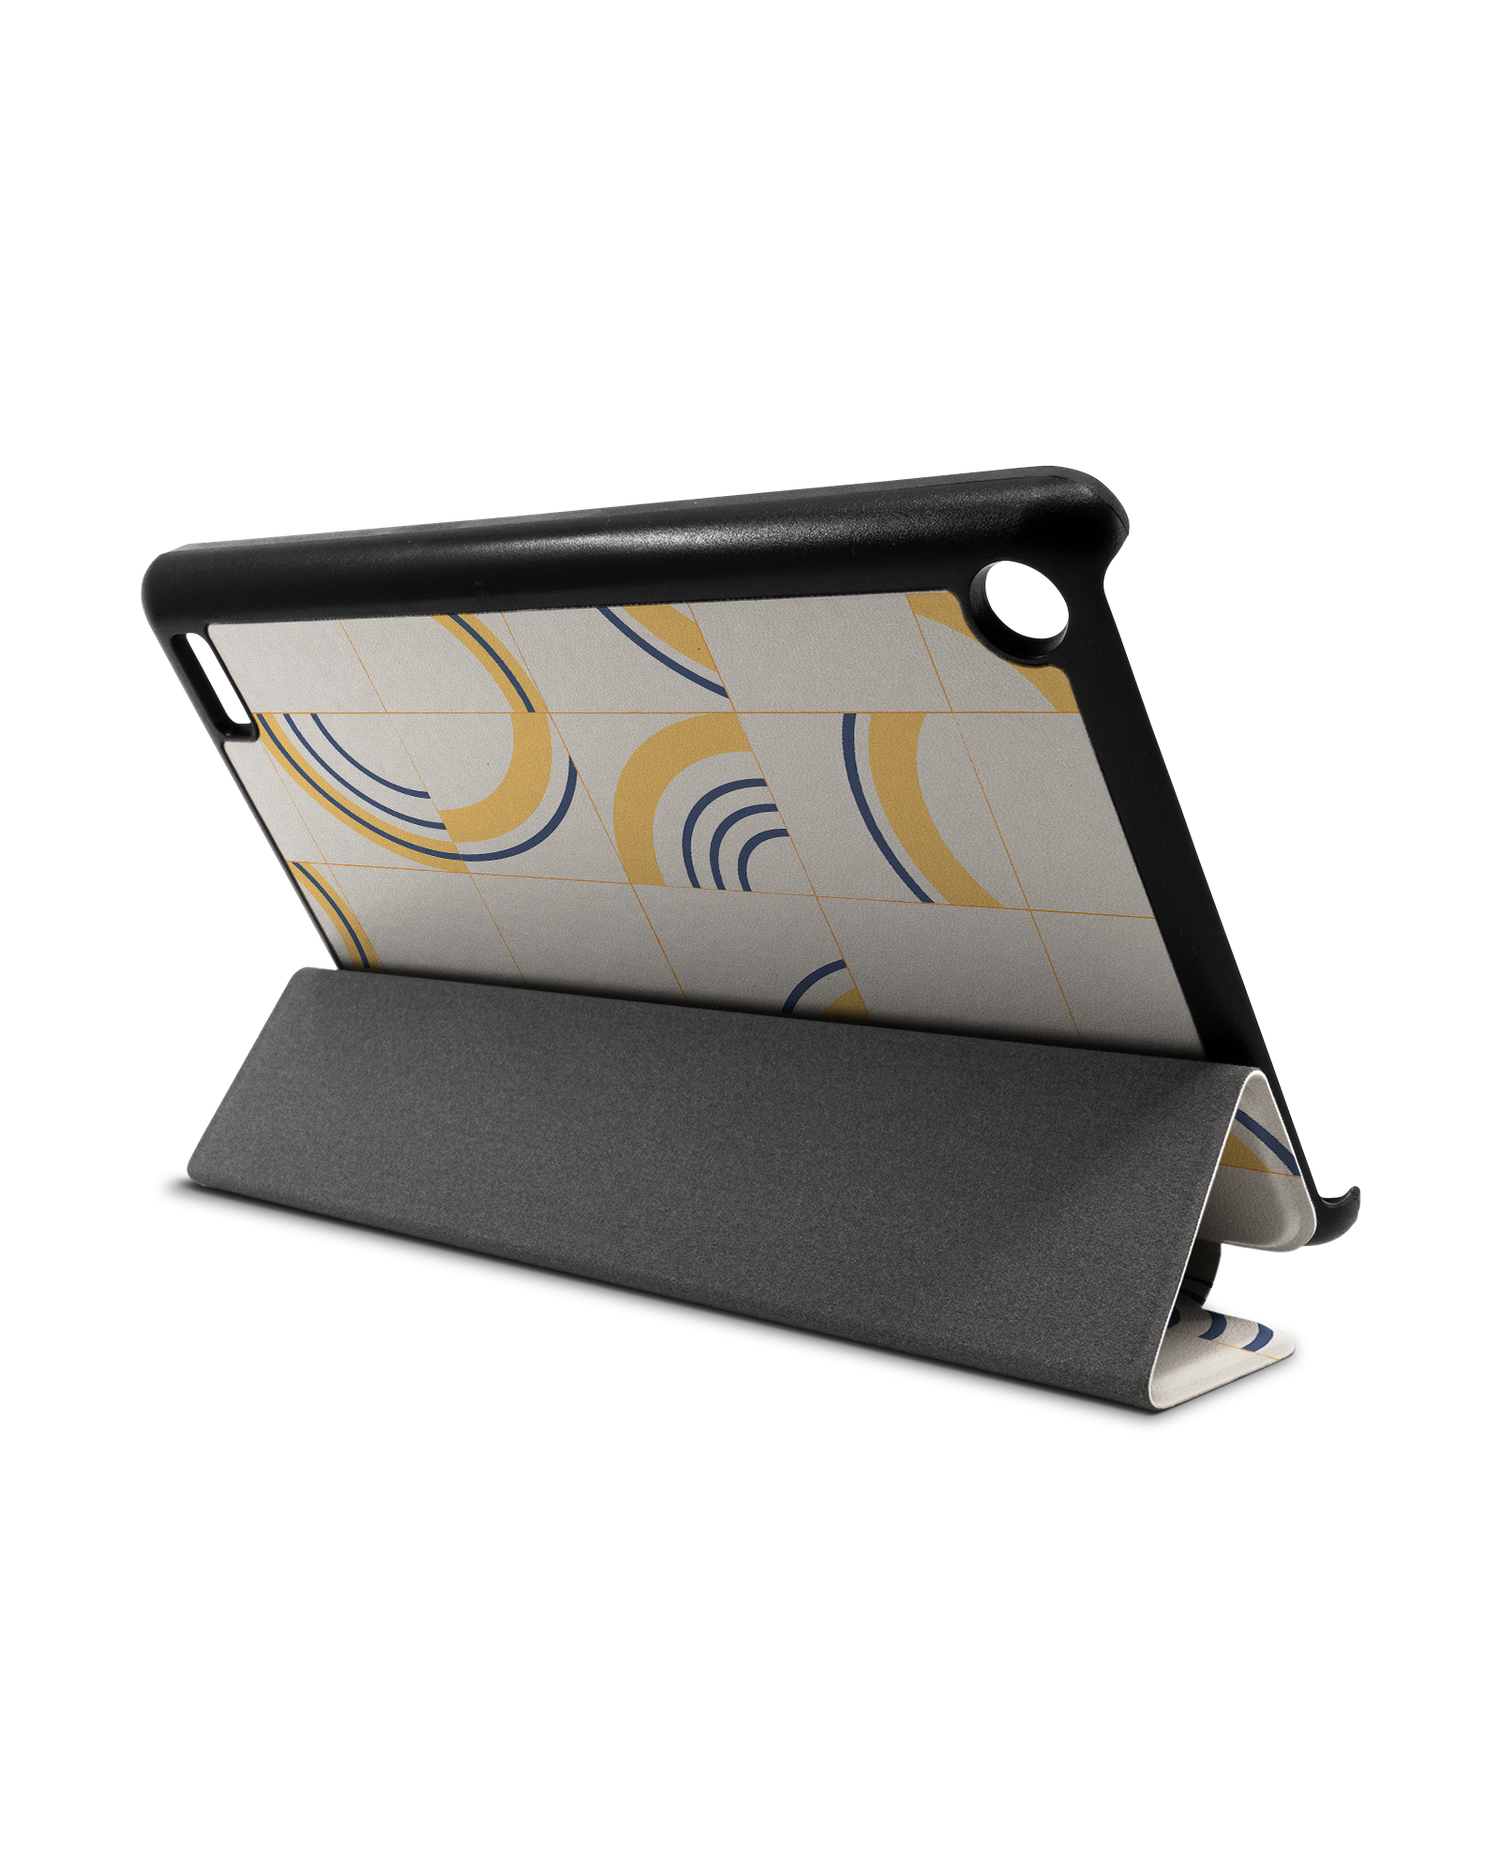 Spliced Circles Tablet Smart Case for Amazon Fire 7: Used as Stand